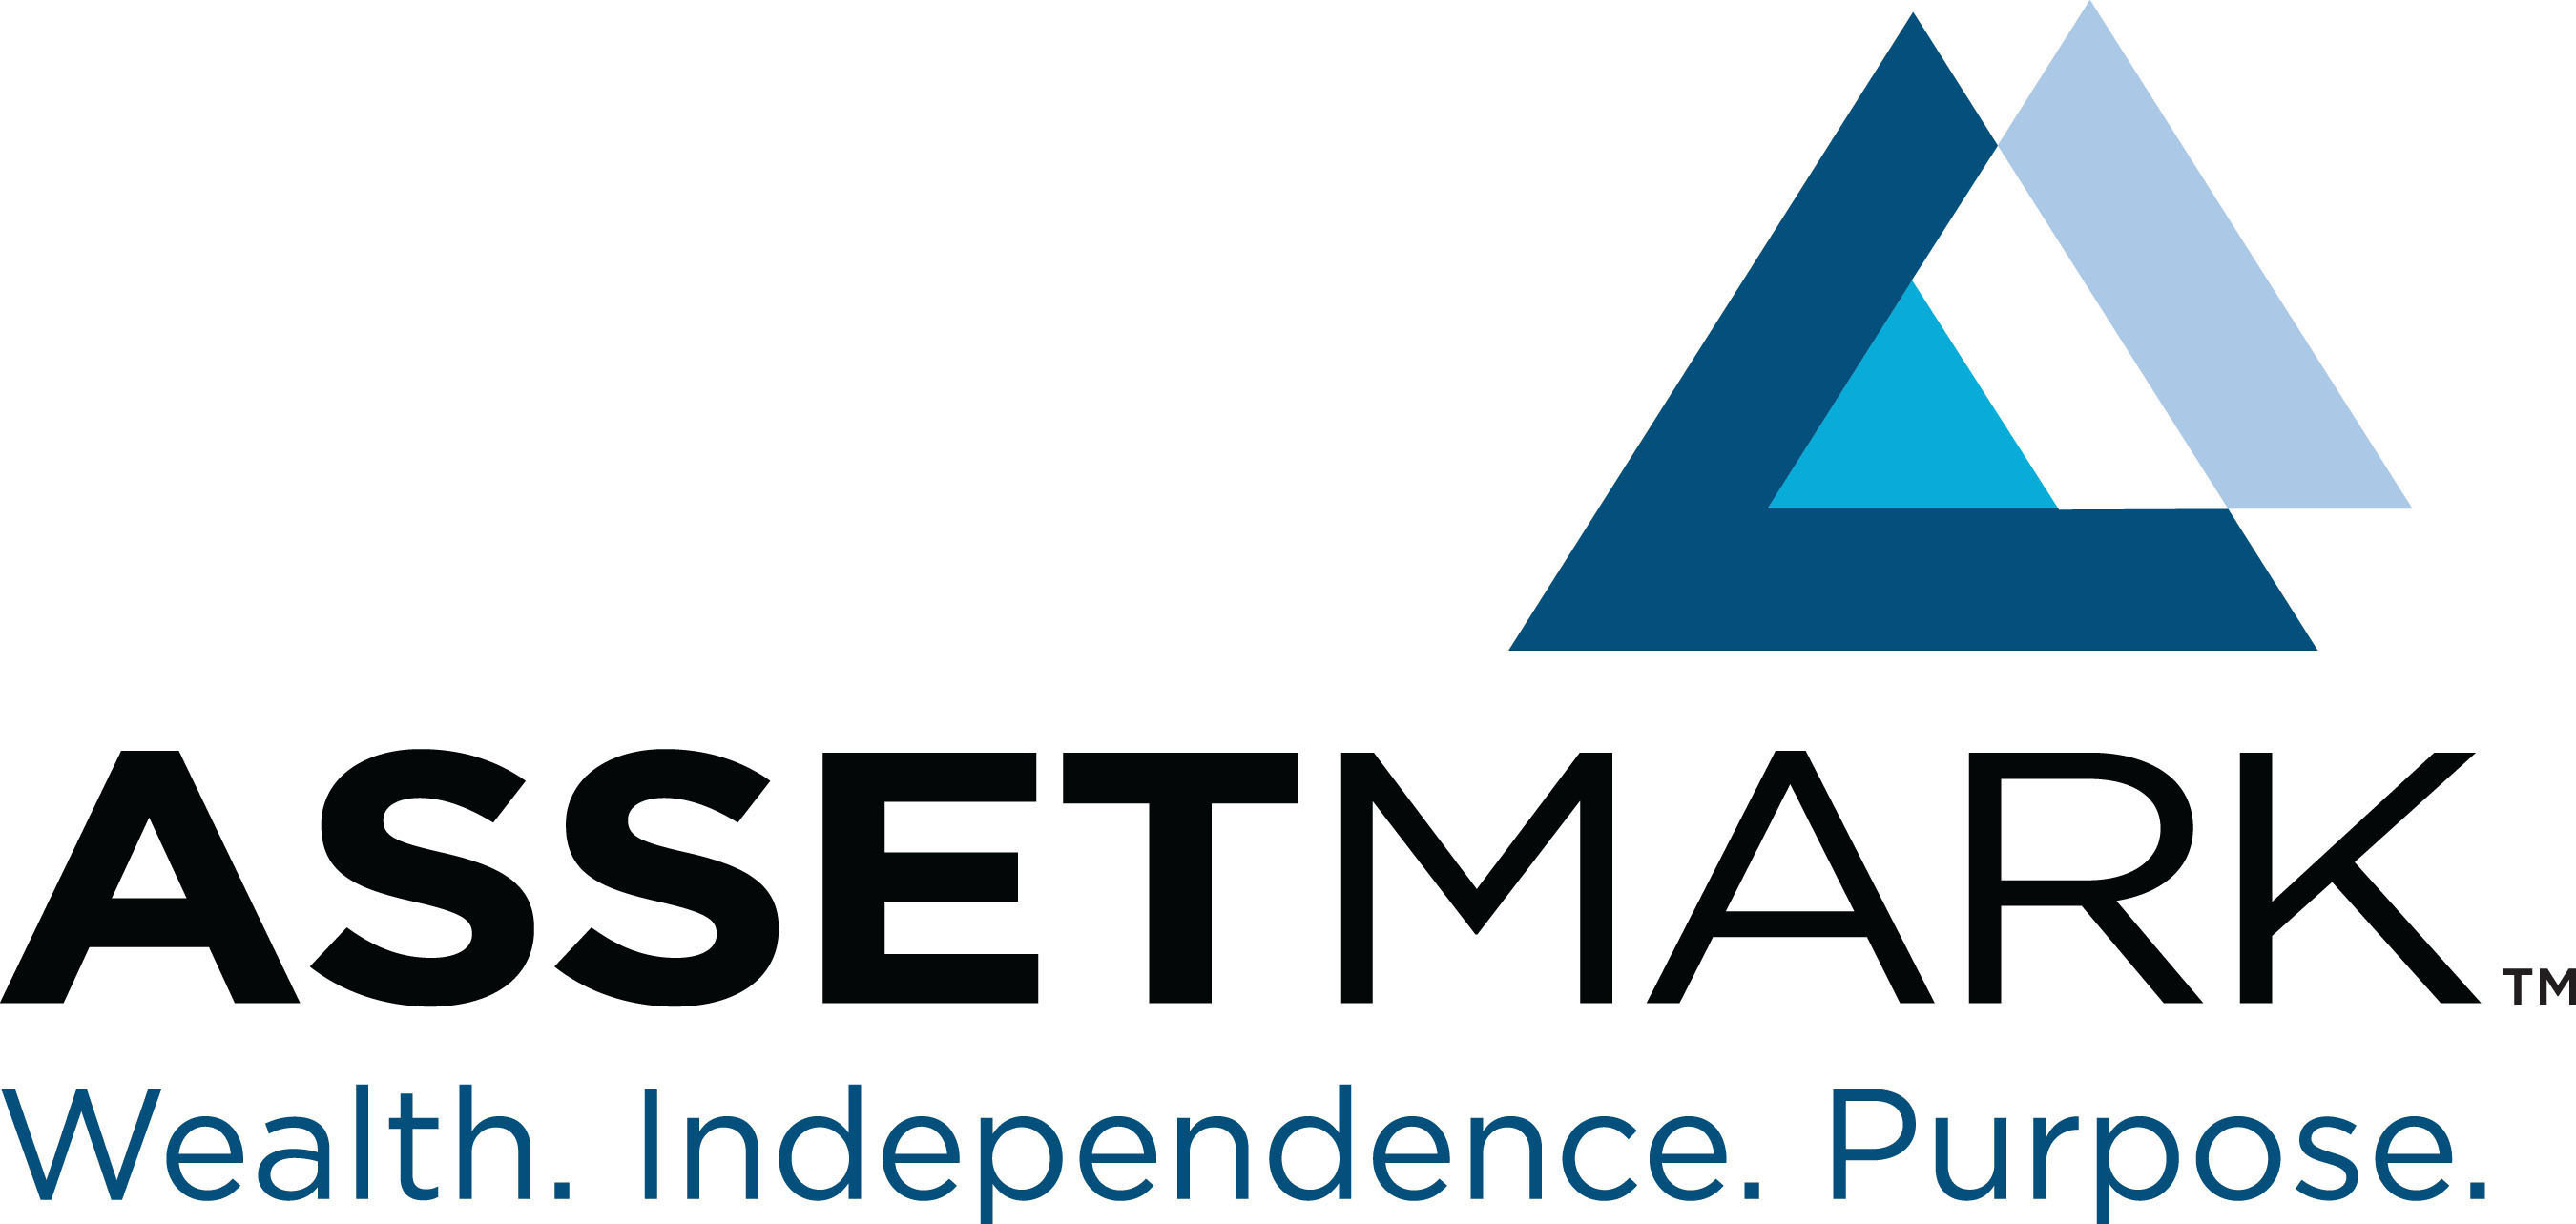 AssetMark - Wealth. Independence. Purpose. A leading strategic provider of innovative investment and consulting solutions serving financial advisors. (PRNewsFoto/AssetMark, Inc.) (PRNewsFoto/ASSETMARK, INC.)